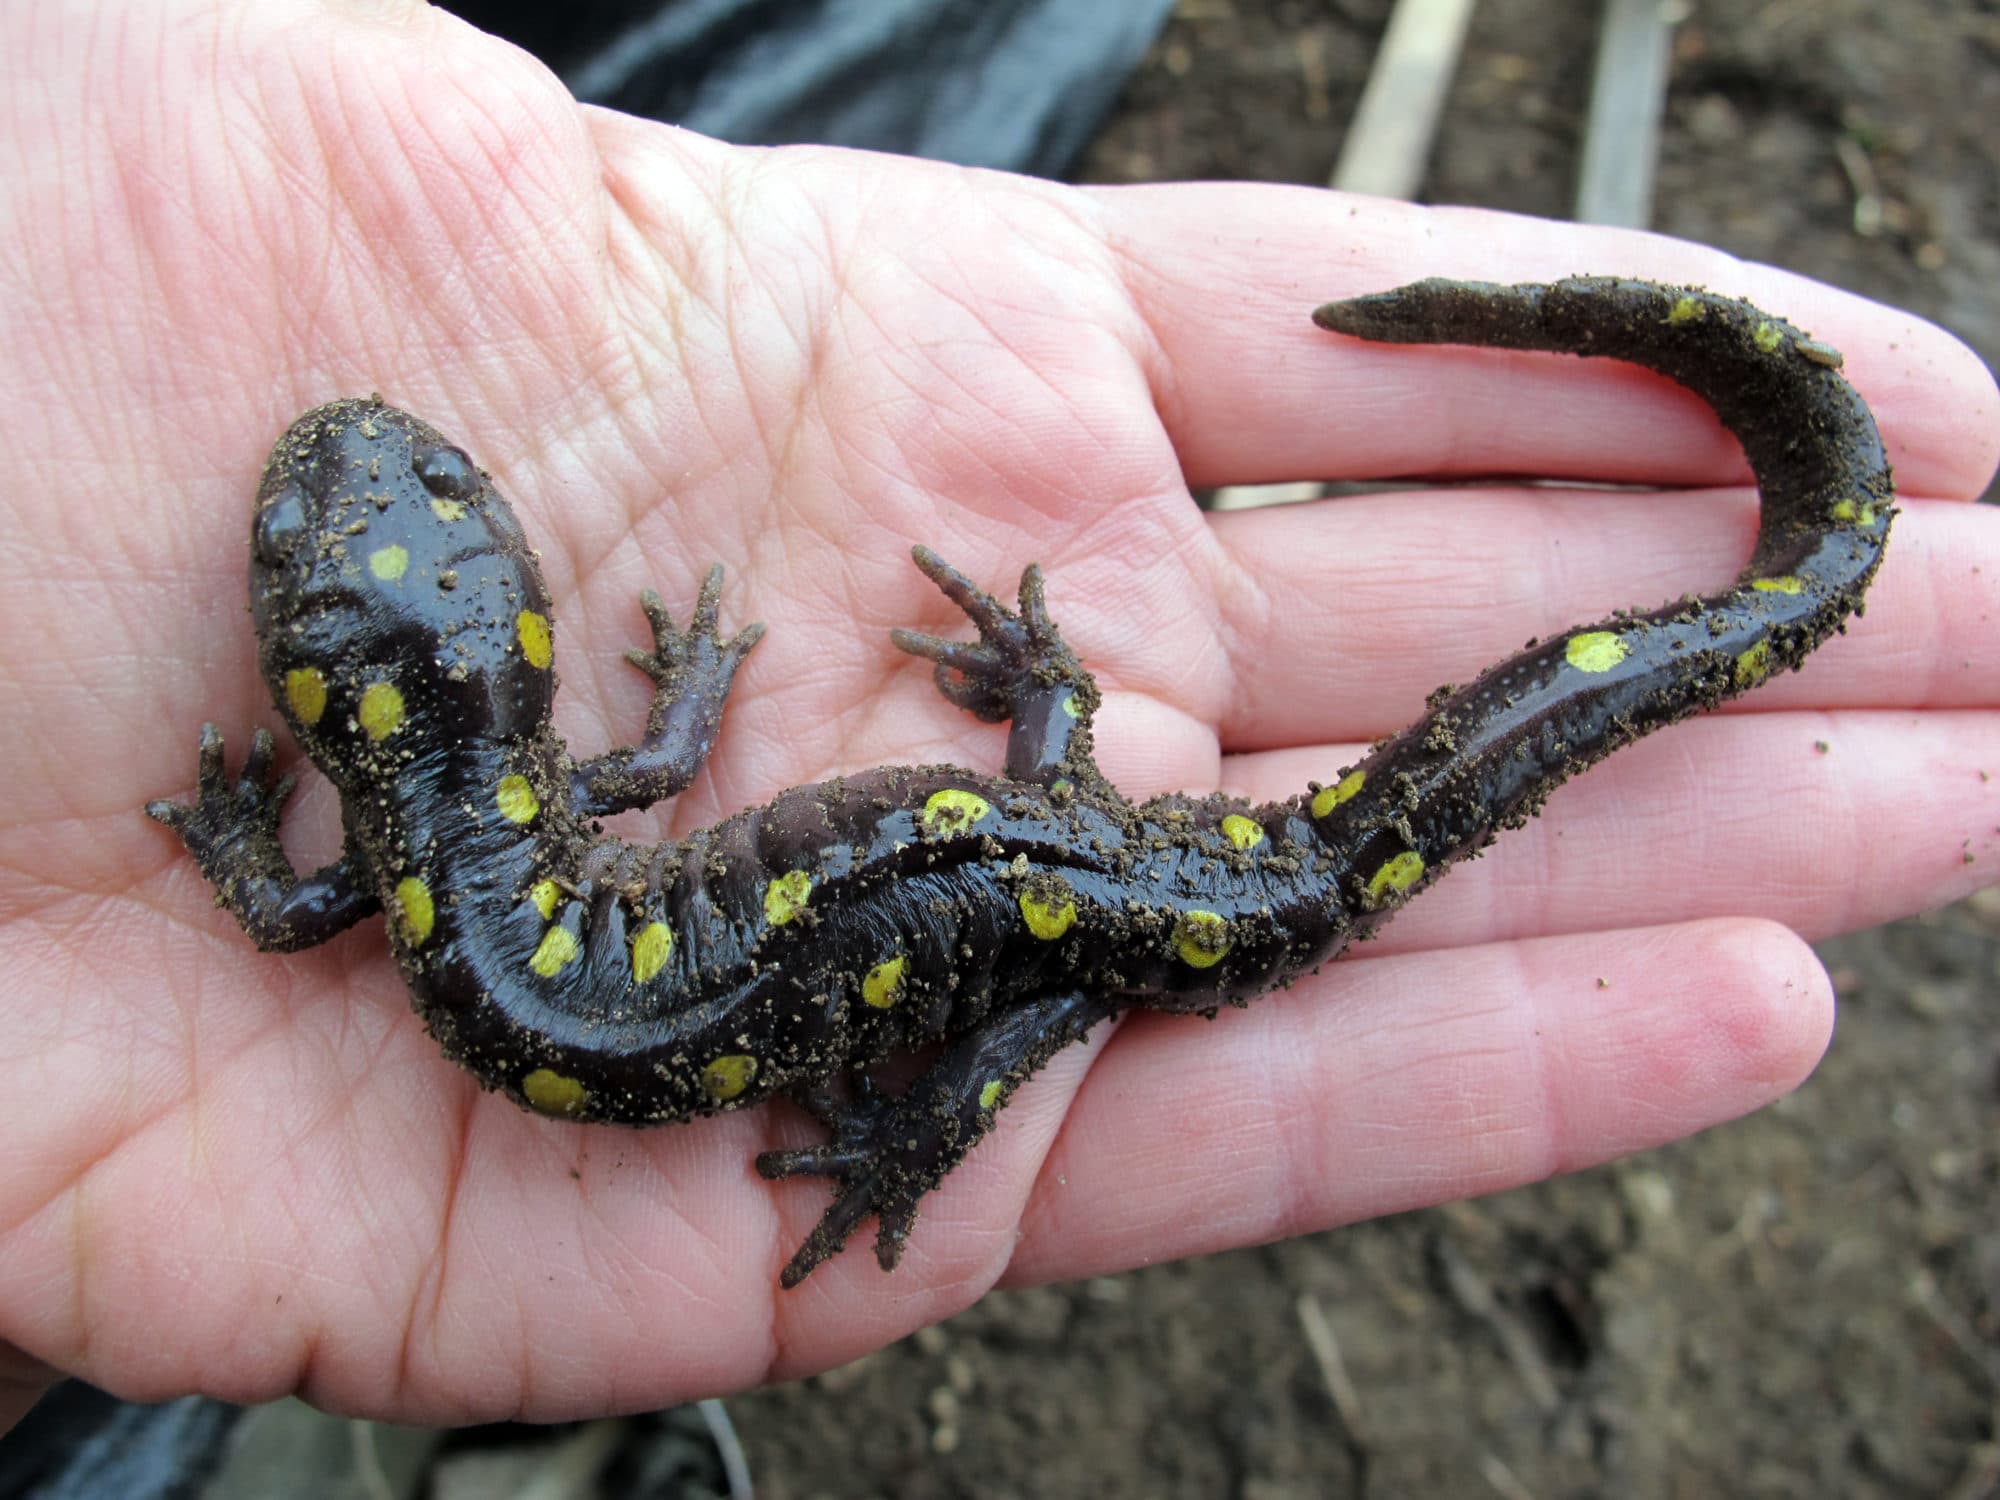 A hand holding a spotted salamander. (photo © Brett Amy Thelen)